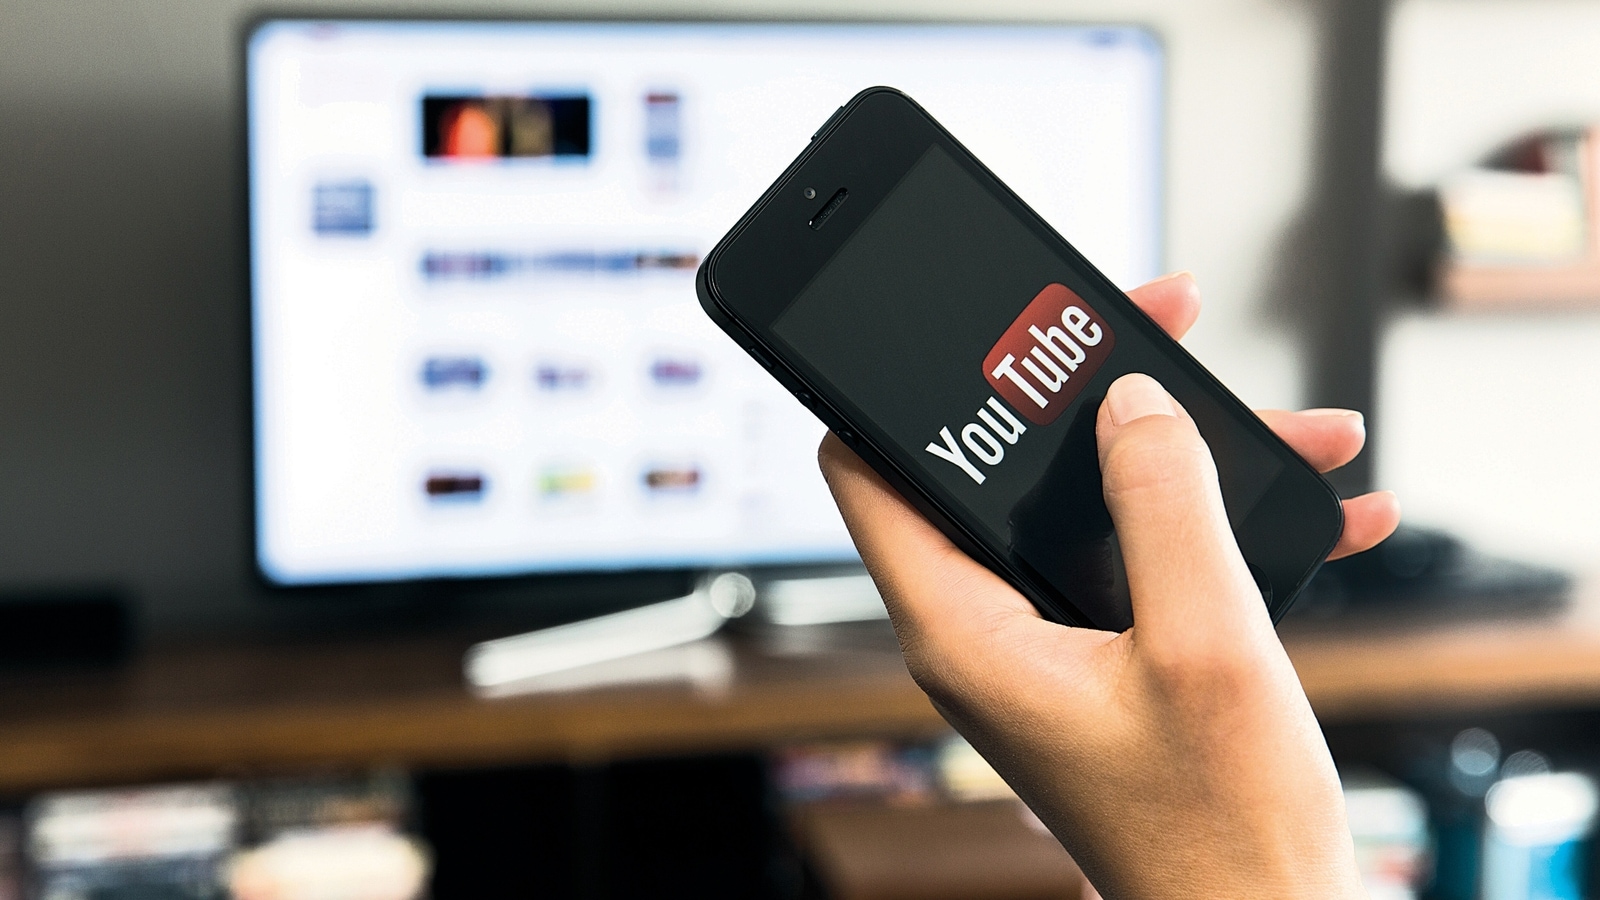 Bad News! YouTube Stories shutting down from June 26 as Google shifts ...